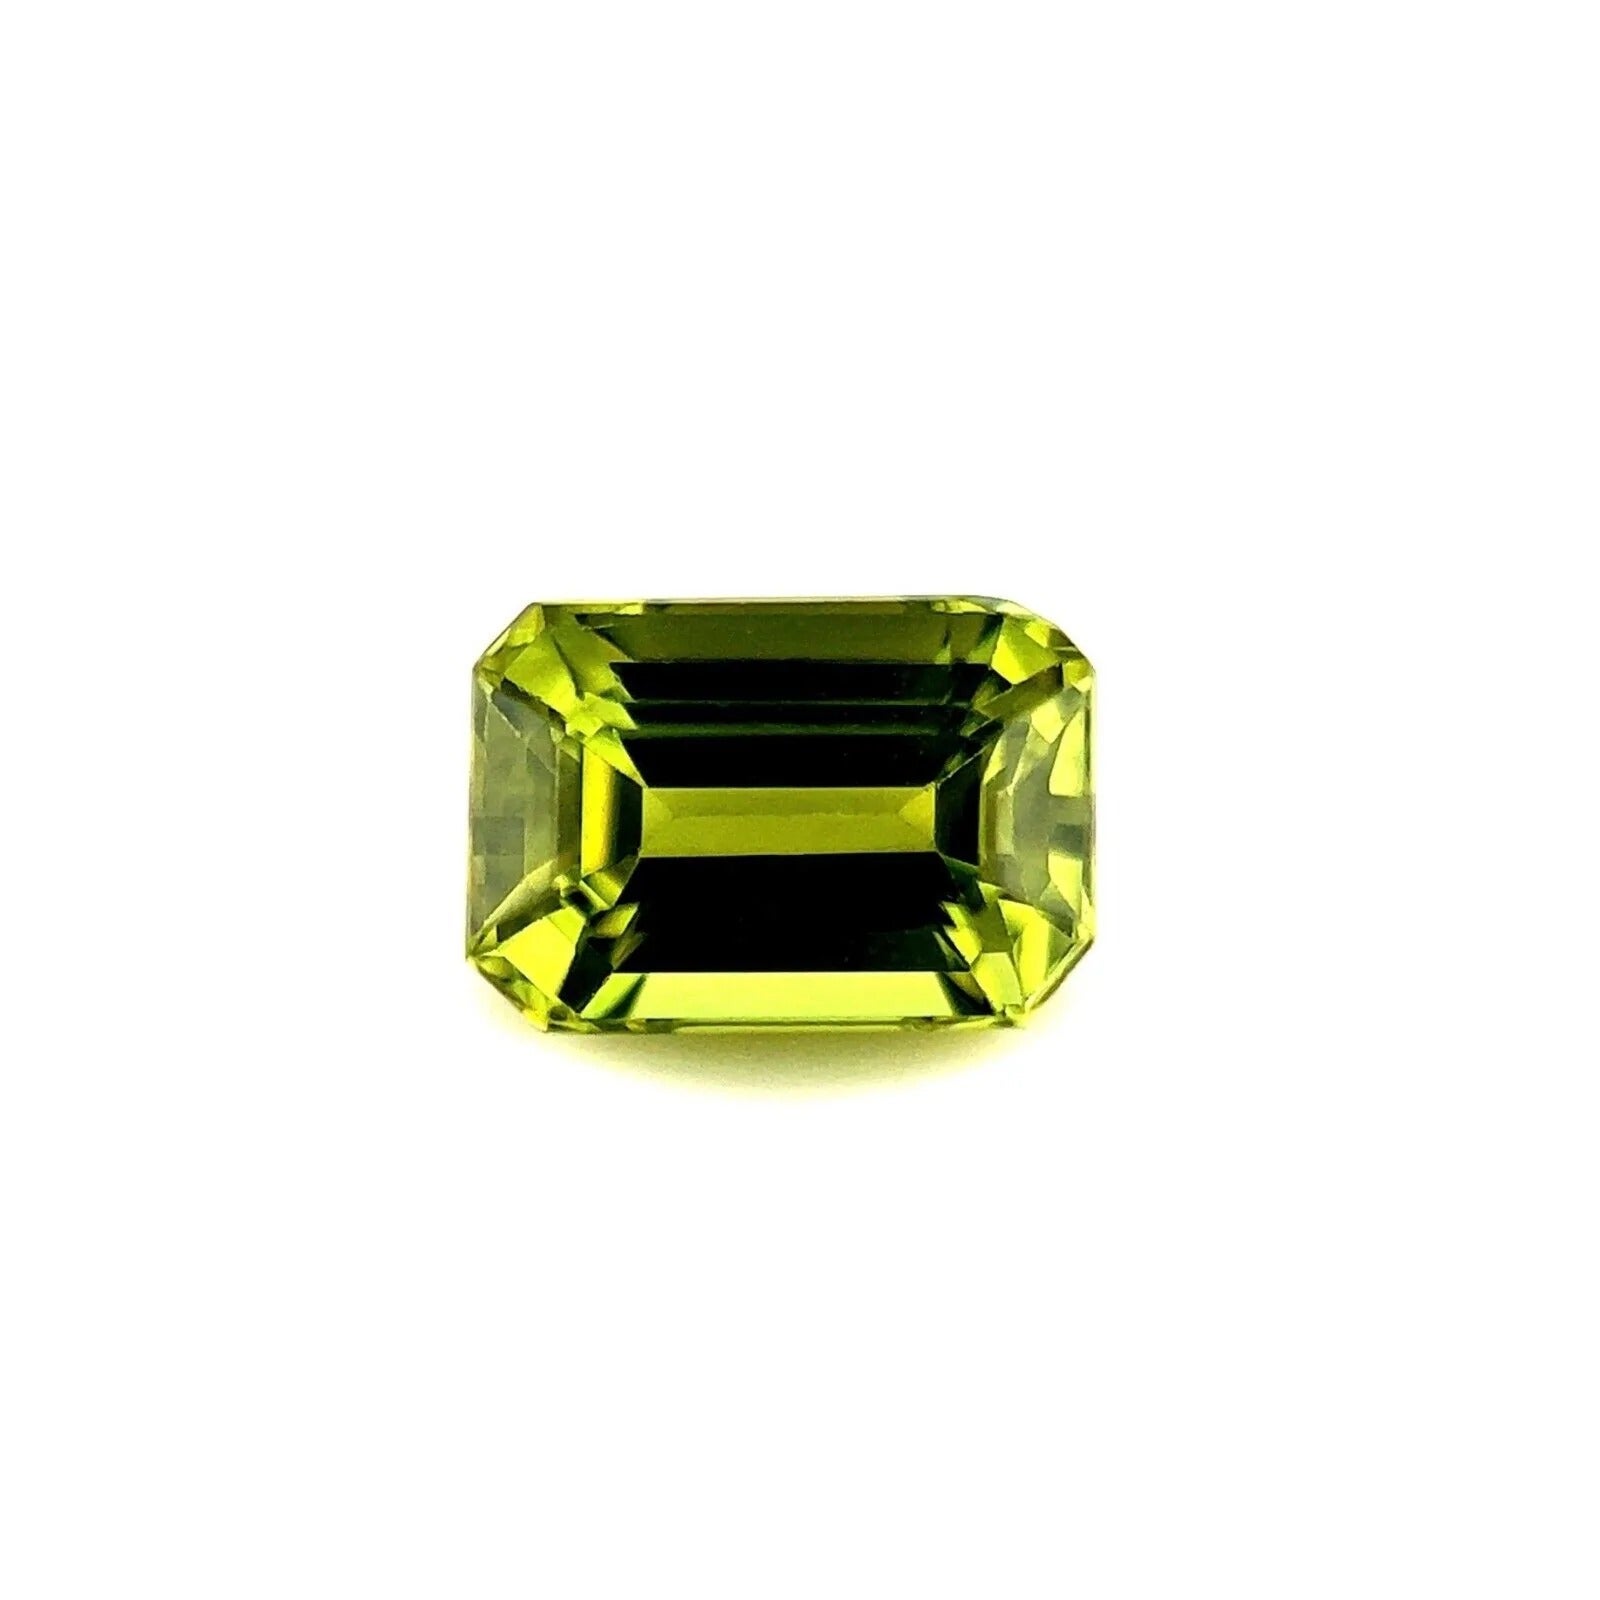 GIA Certified 1.01 Untreated Vivid Green Yellow Sapphire Emerald Octagon Cut Gem For Sale